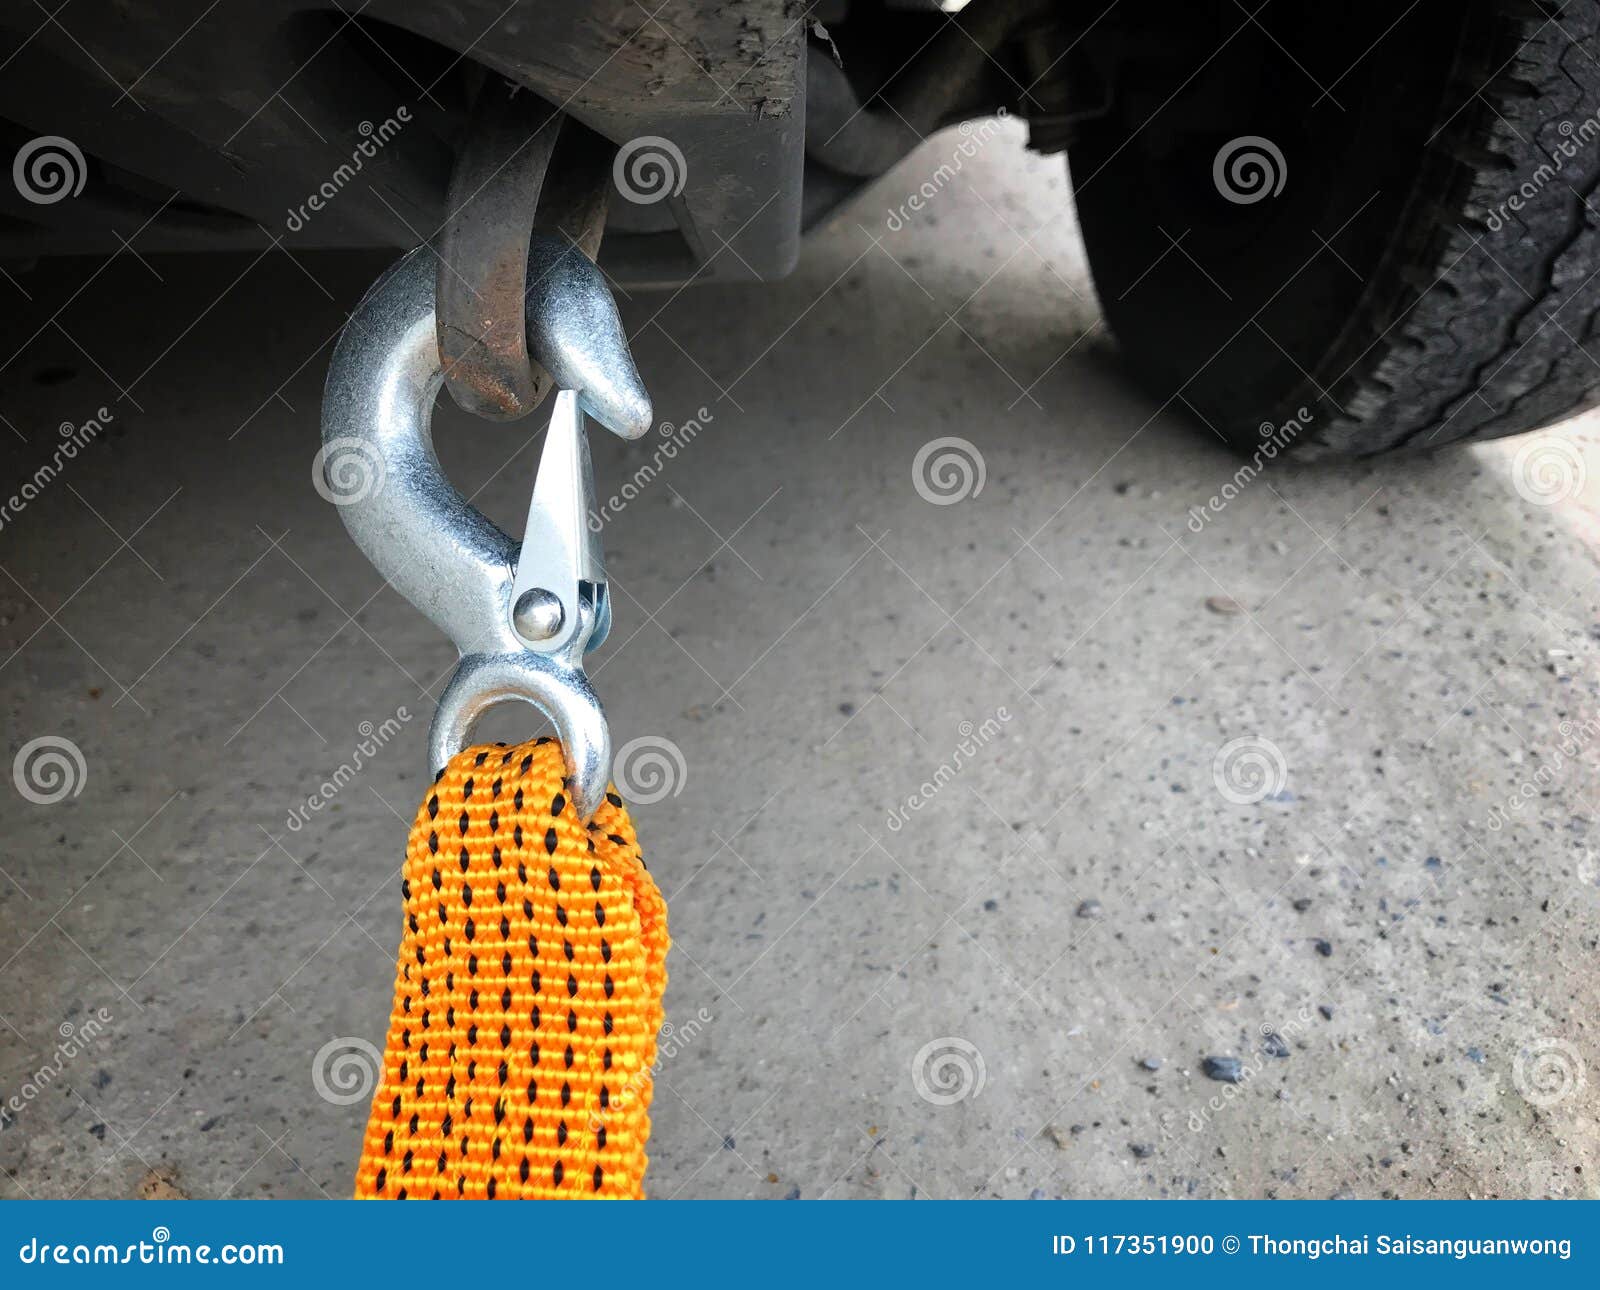 https://thumbs.dreamstime.com/z/car-rope-emergency-equipment-used-vehicle-broken-can-not-move-used-towing-car-rope-emergency-equipment-117351900.jpg